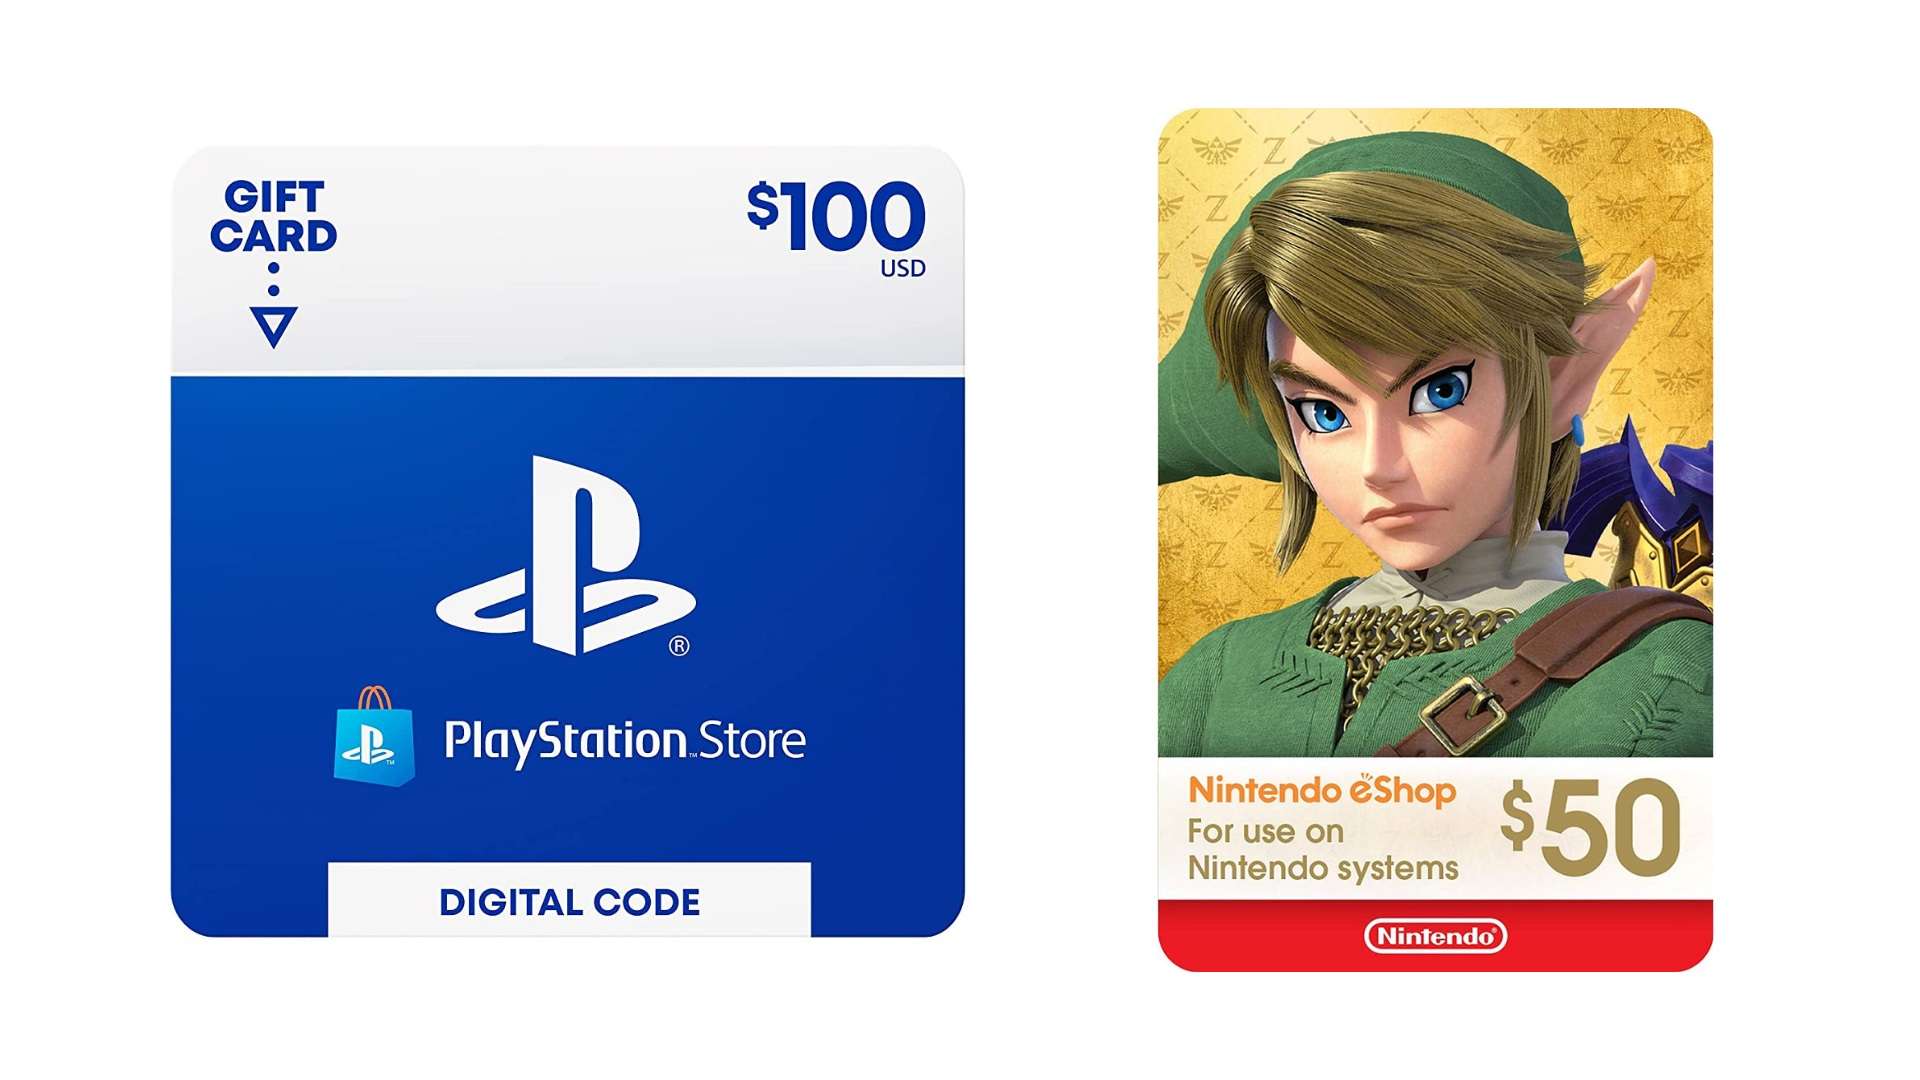 Nintendo eShop and PlayStation Store gift cards Amazon